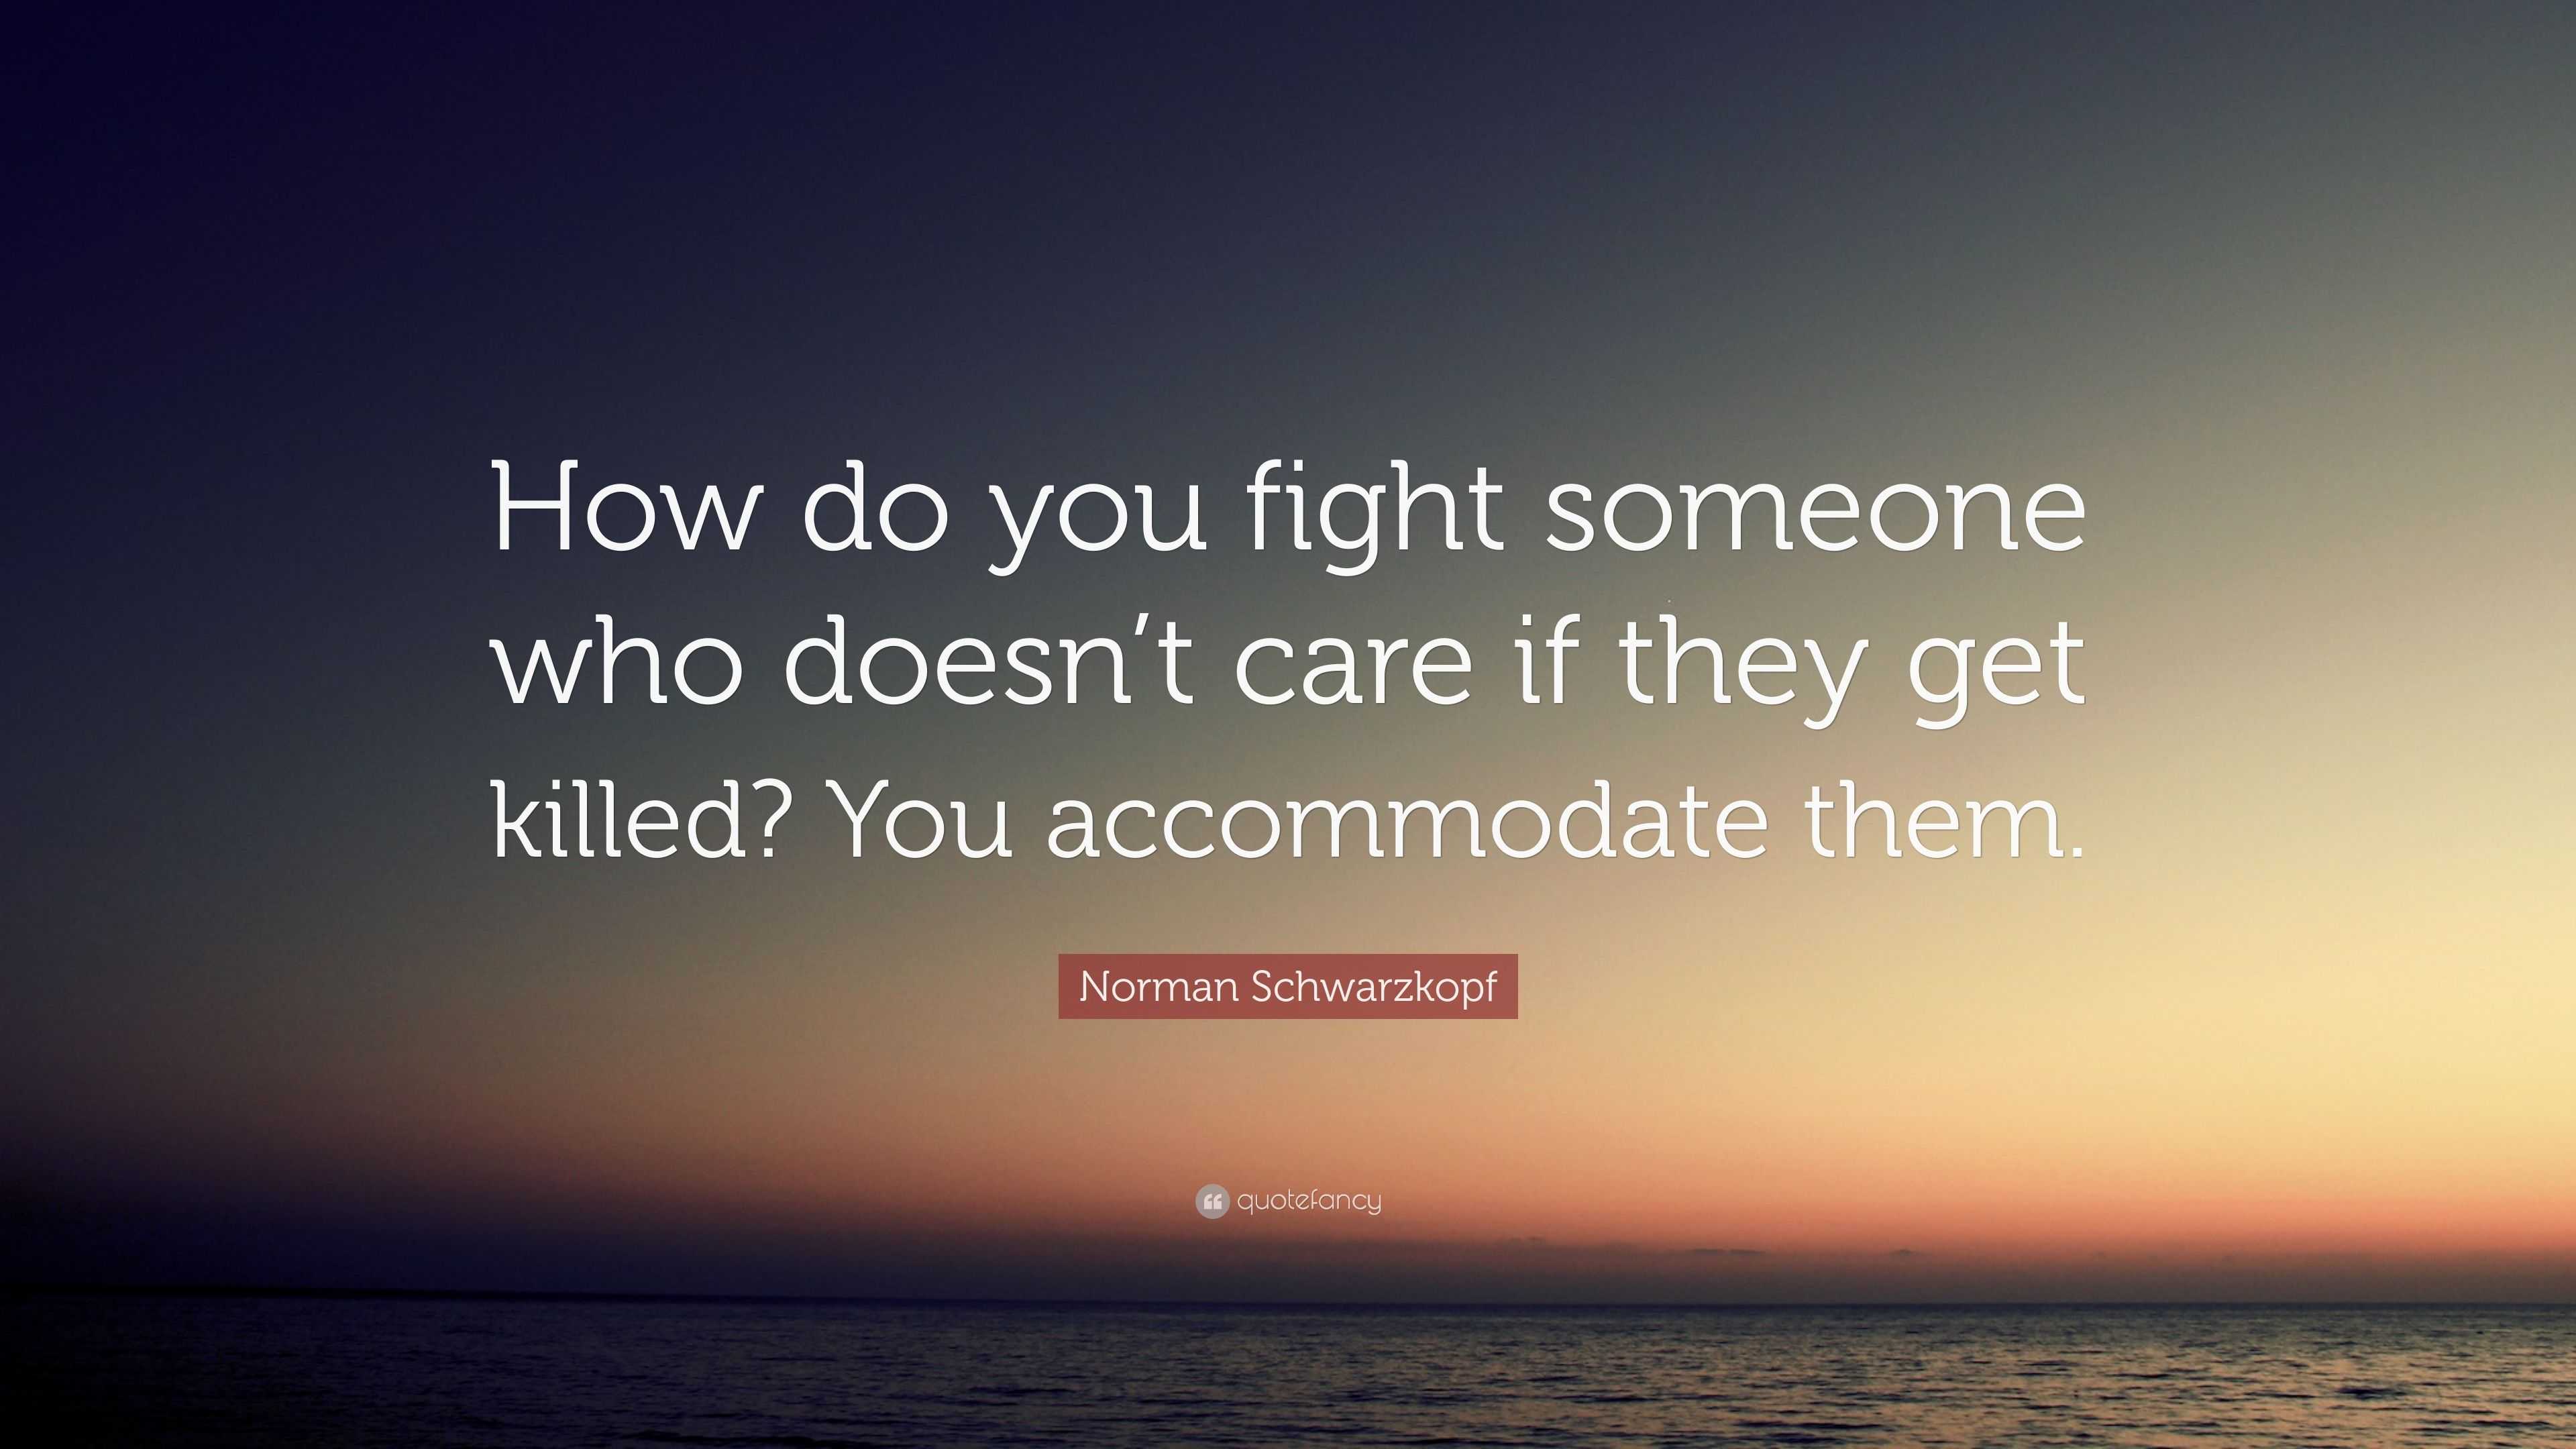 Norman Schwarzkopf Quote “How do you fight someone who doesn t care if